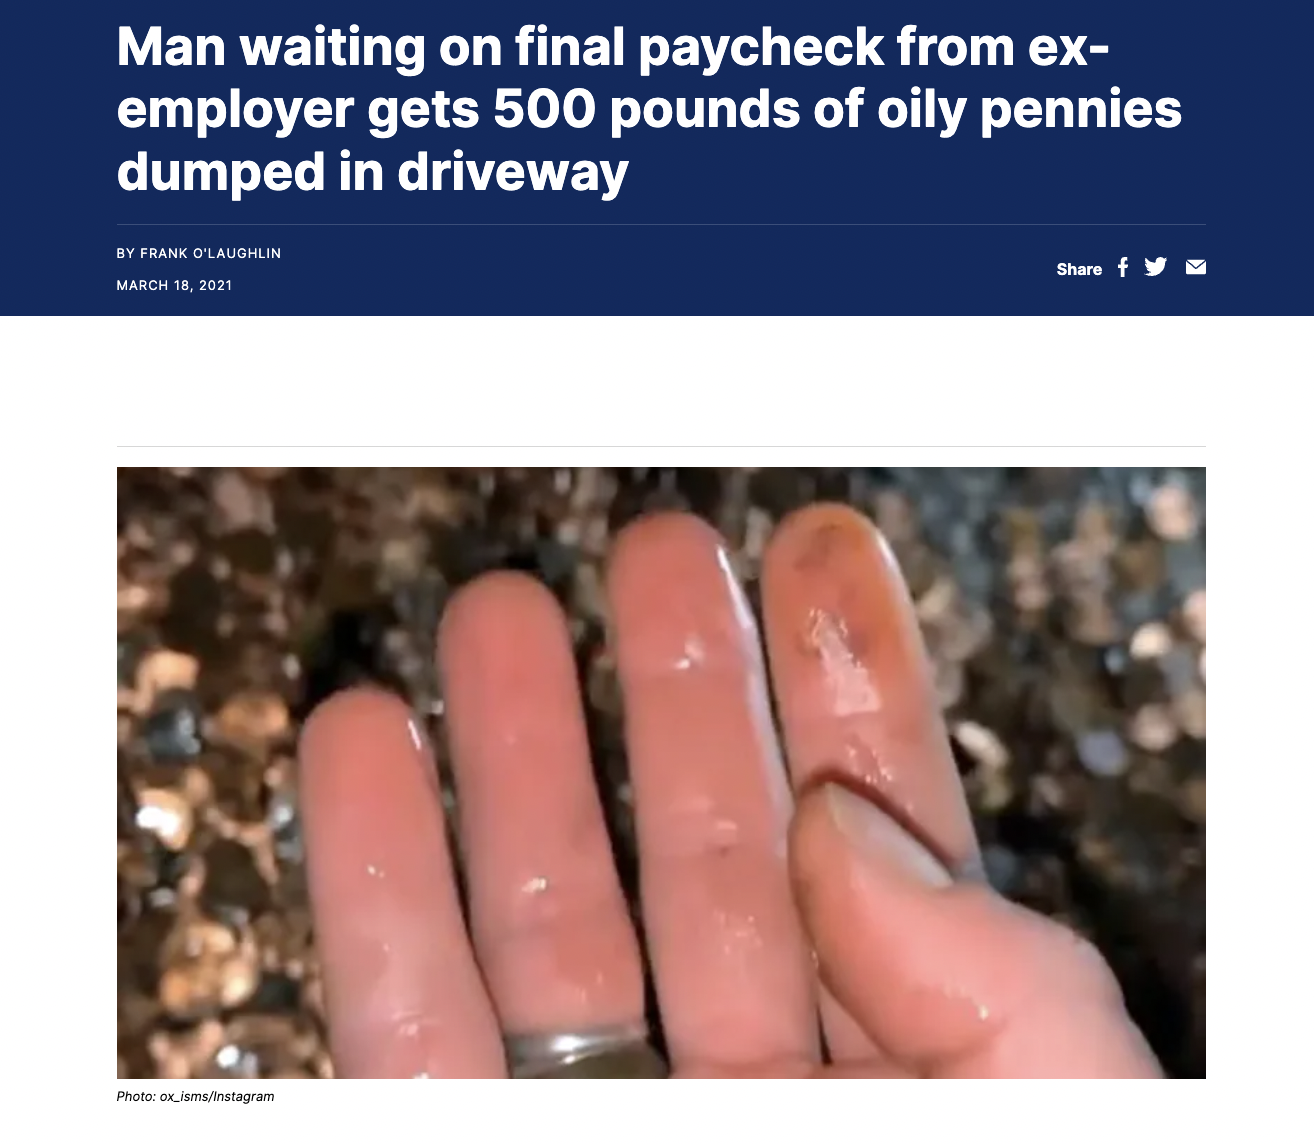 screenshot - Man waiting on final paycheck from ex employer gets 500 pounds of oily pennies dumped in driveway By Frank Olaughlin f